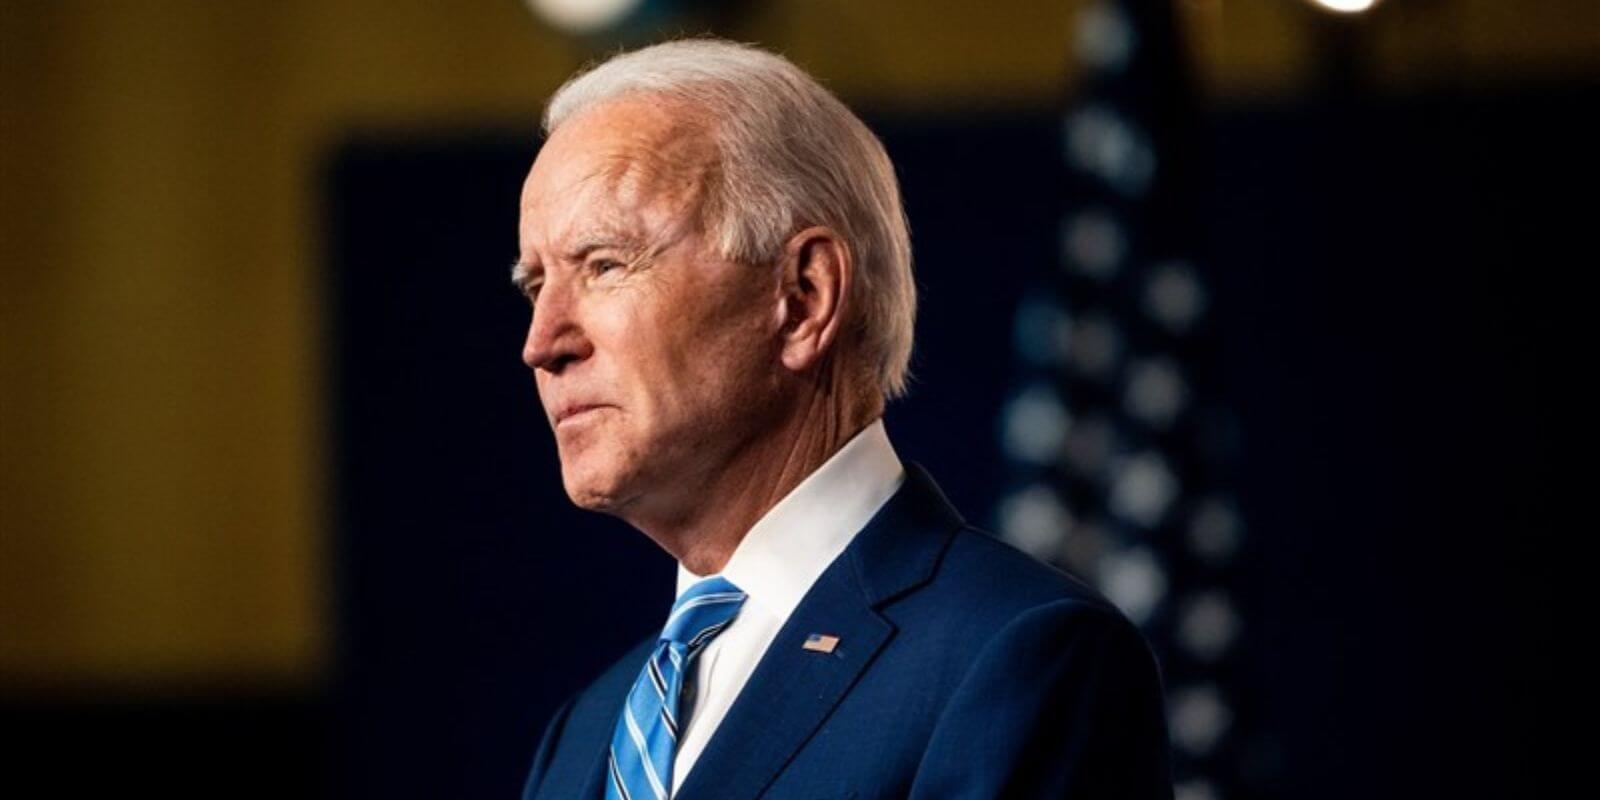 Biden's job approval rating hits career low: poll